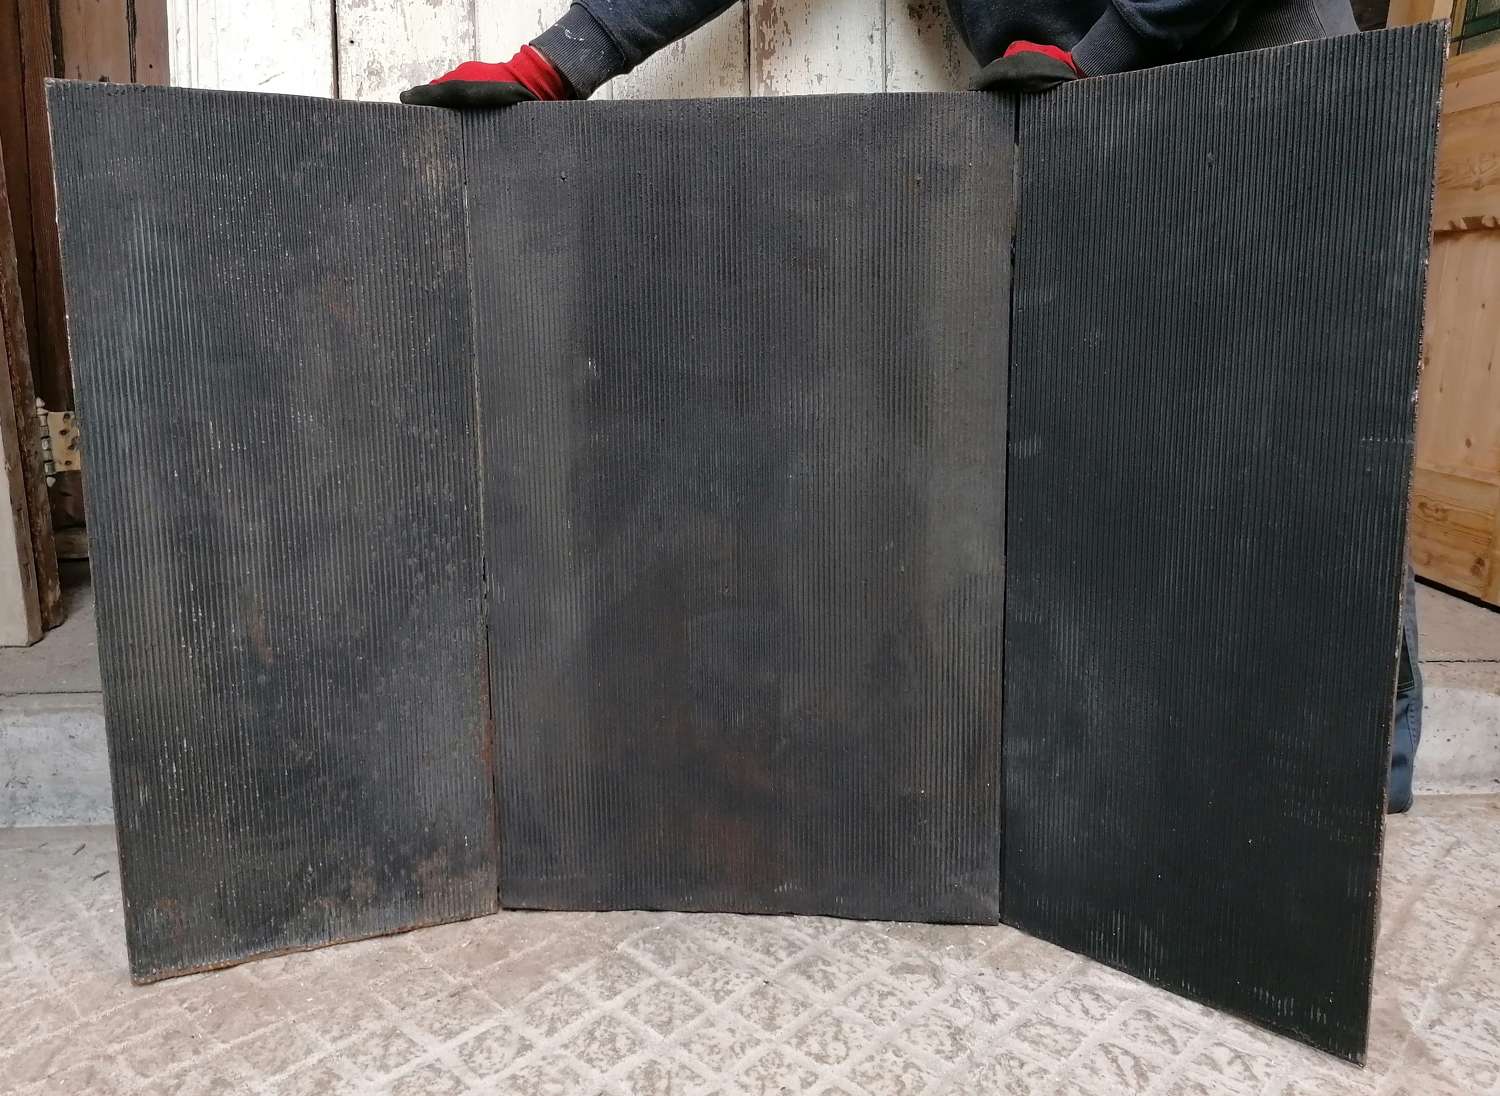 FX012 3 LARGE RECLAIMED CAST IRON FIRE PANELS / PLATES FOR FIREPLACE